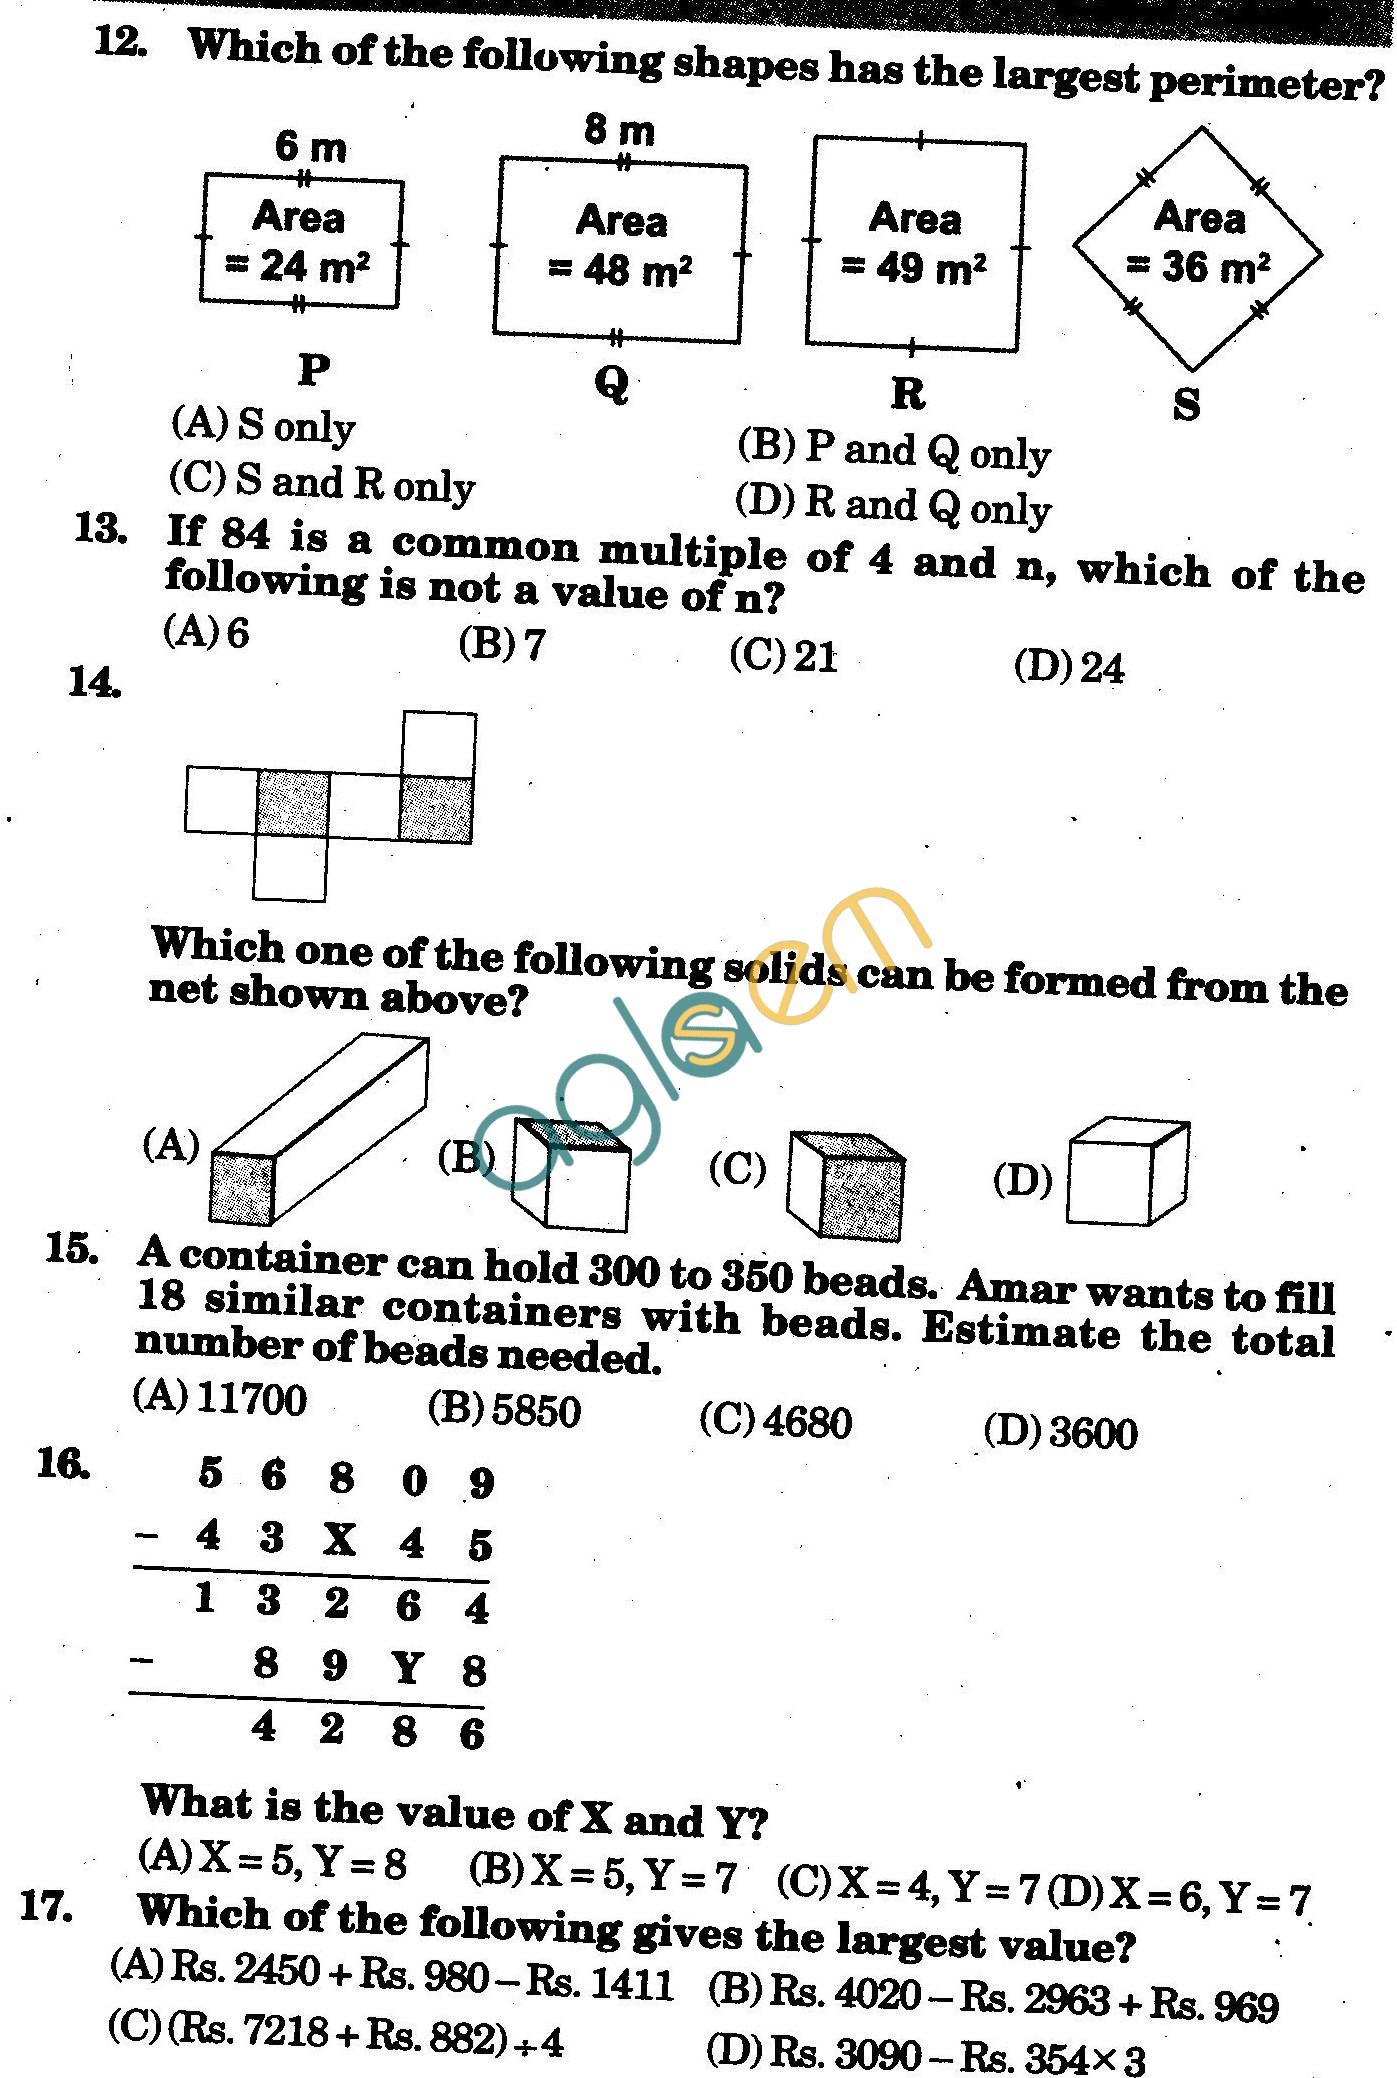 NSTSE 2010 Class V Question Paper with Answers - Mathematics